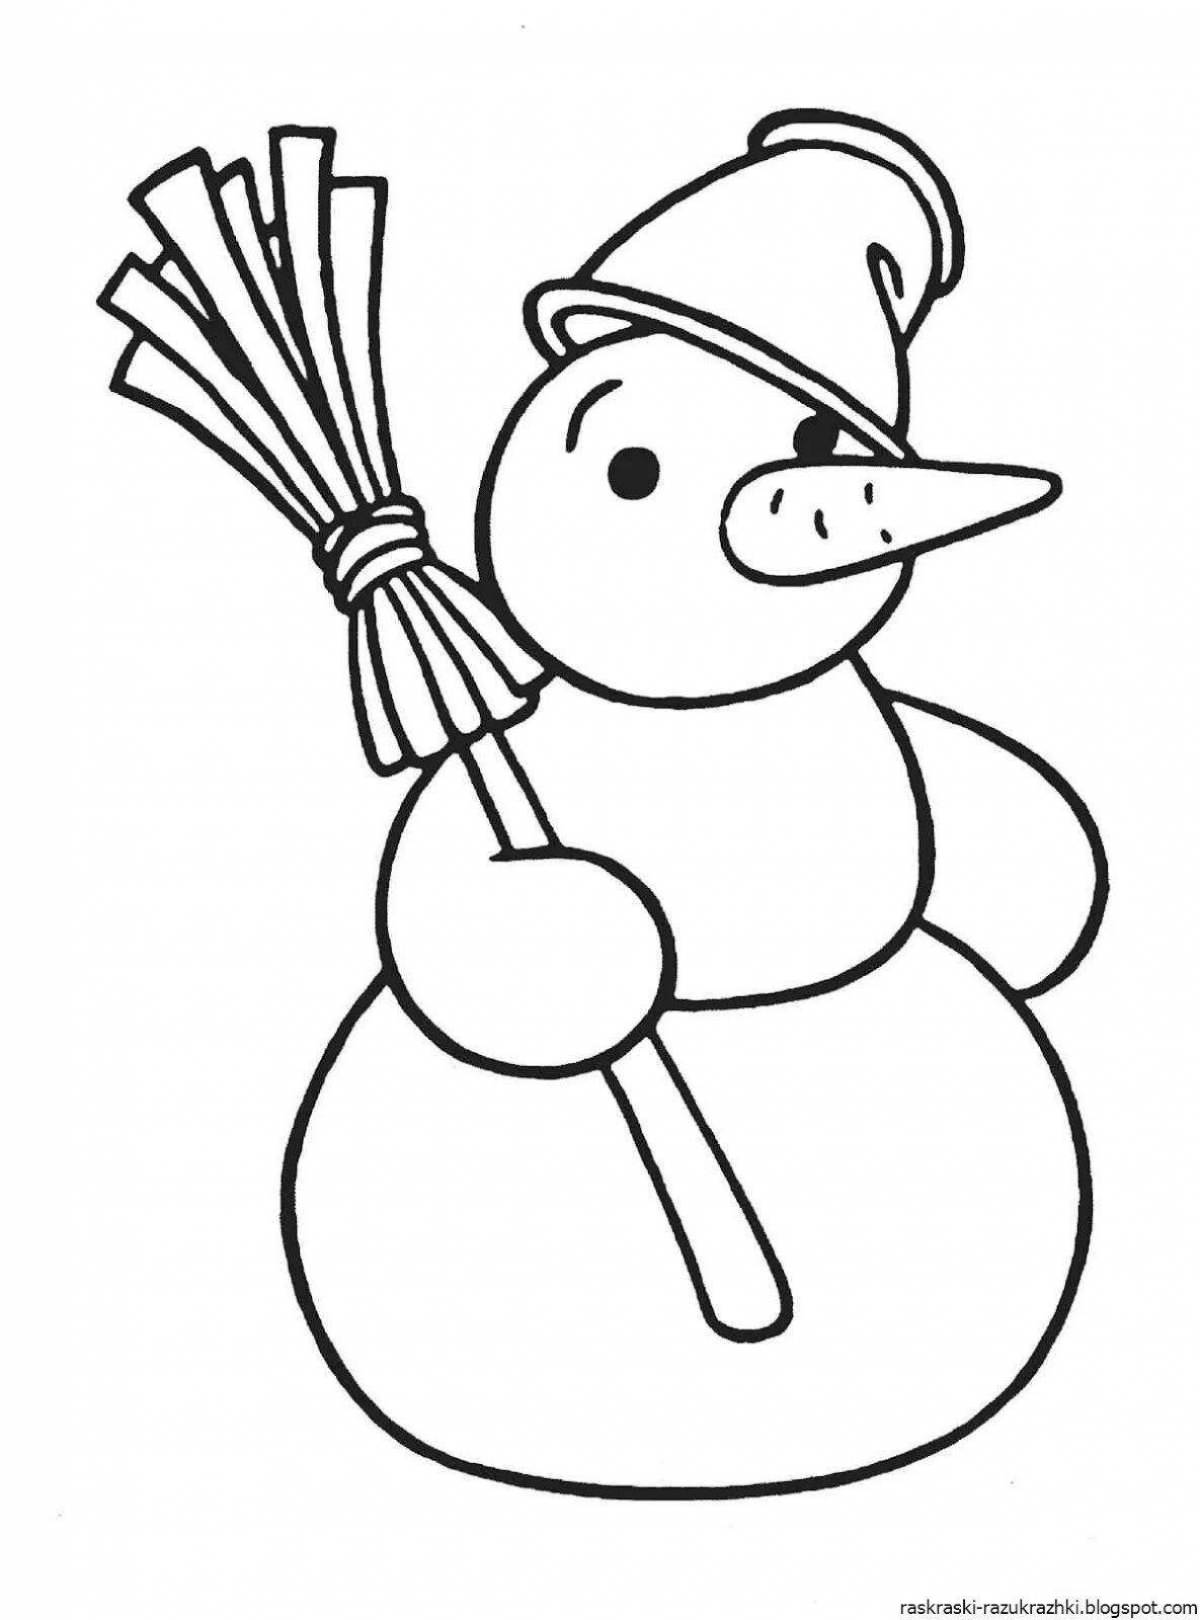 Joyful snowman coloring book for children 6-7 years old